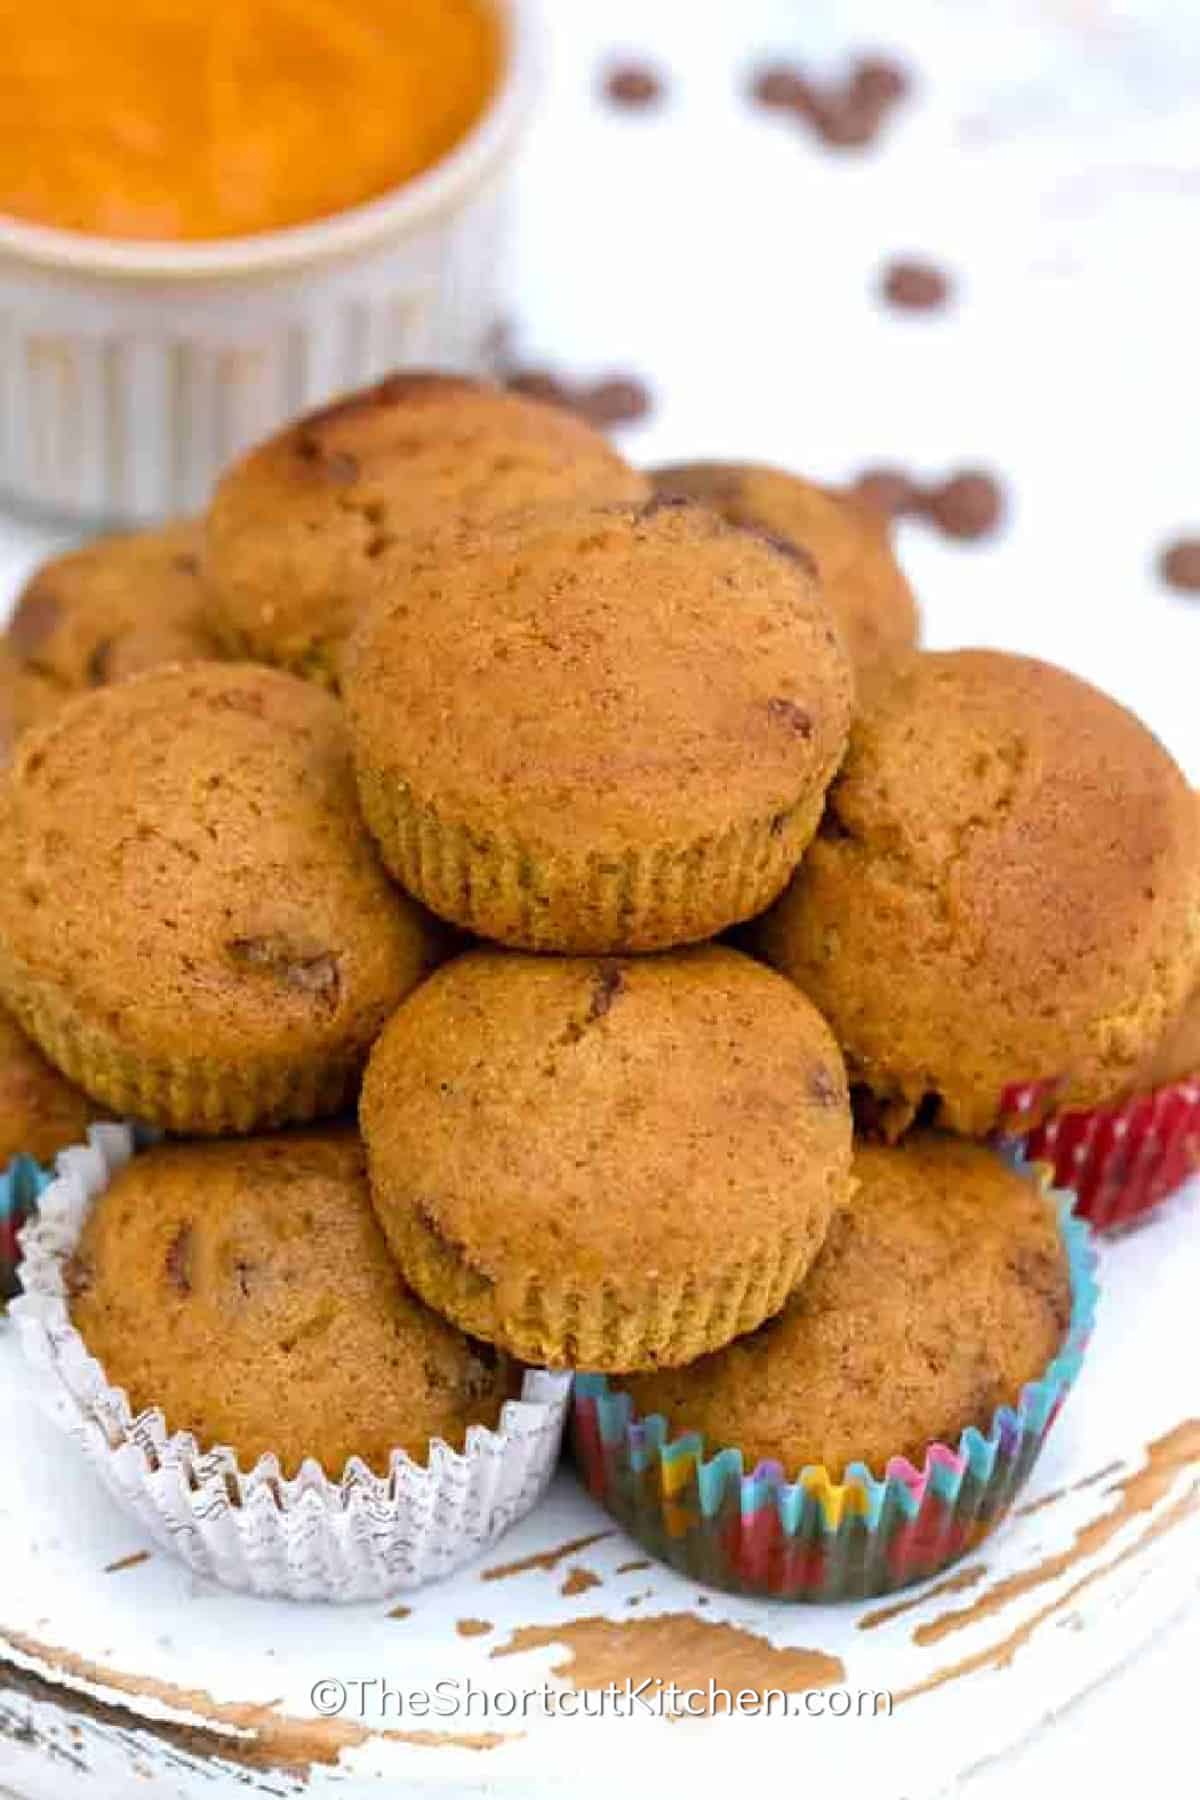 pumpkin chocolate chip muffins piled together on a wooden board